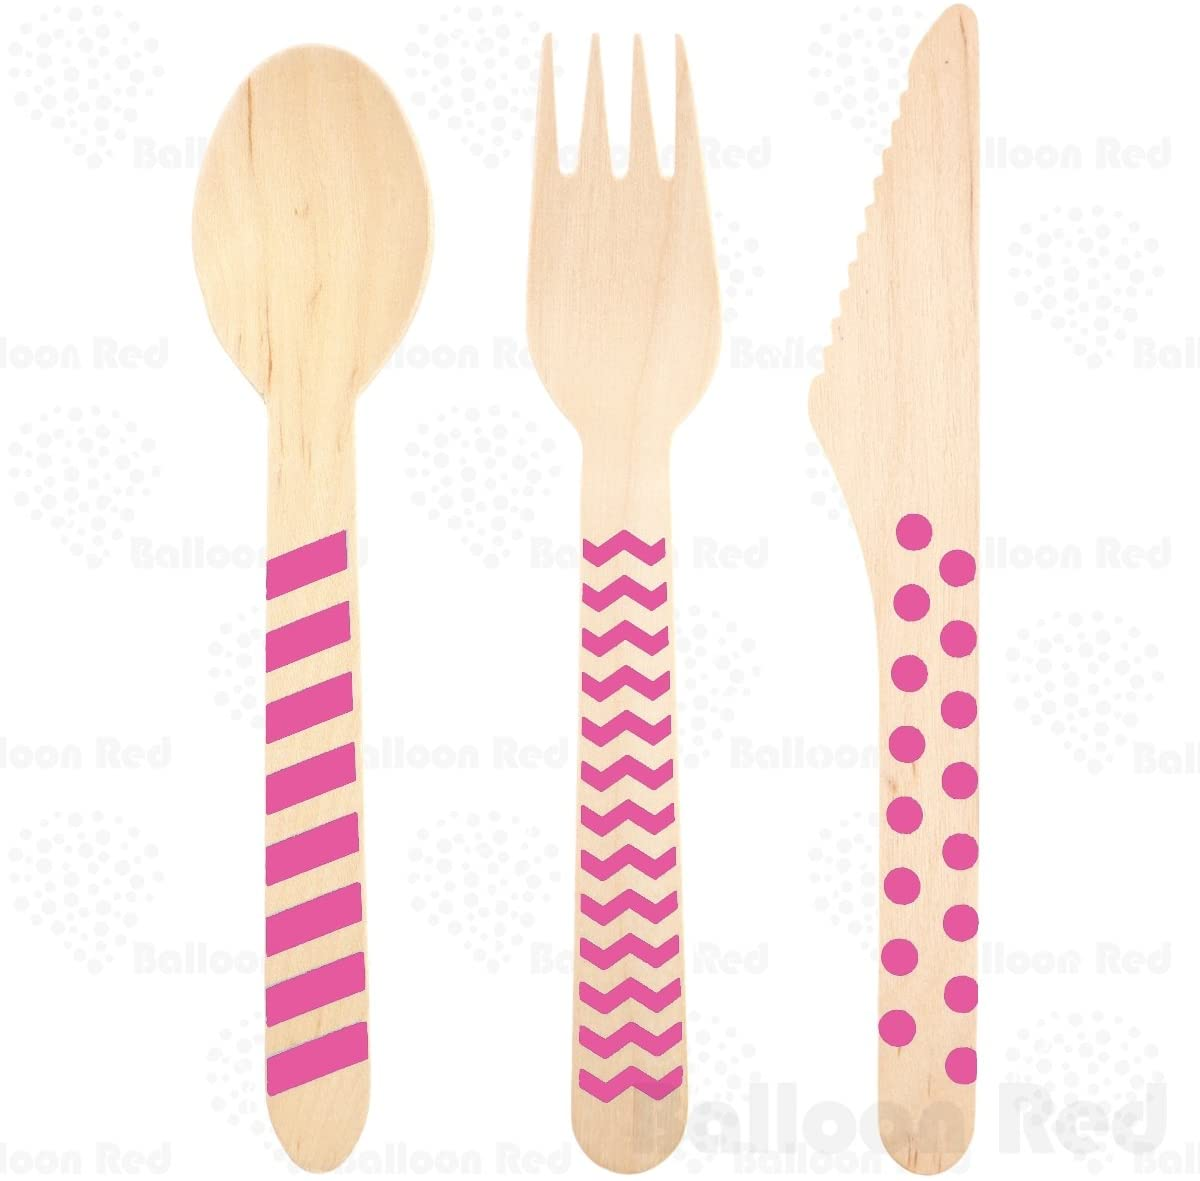  disposable wooden cutlery set